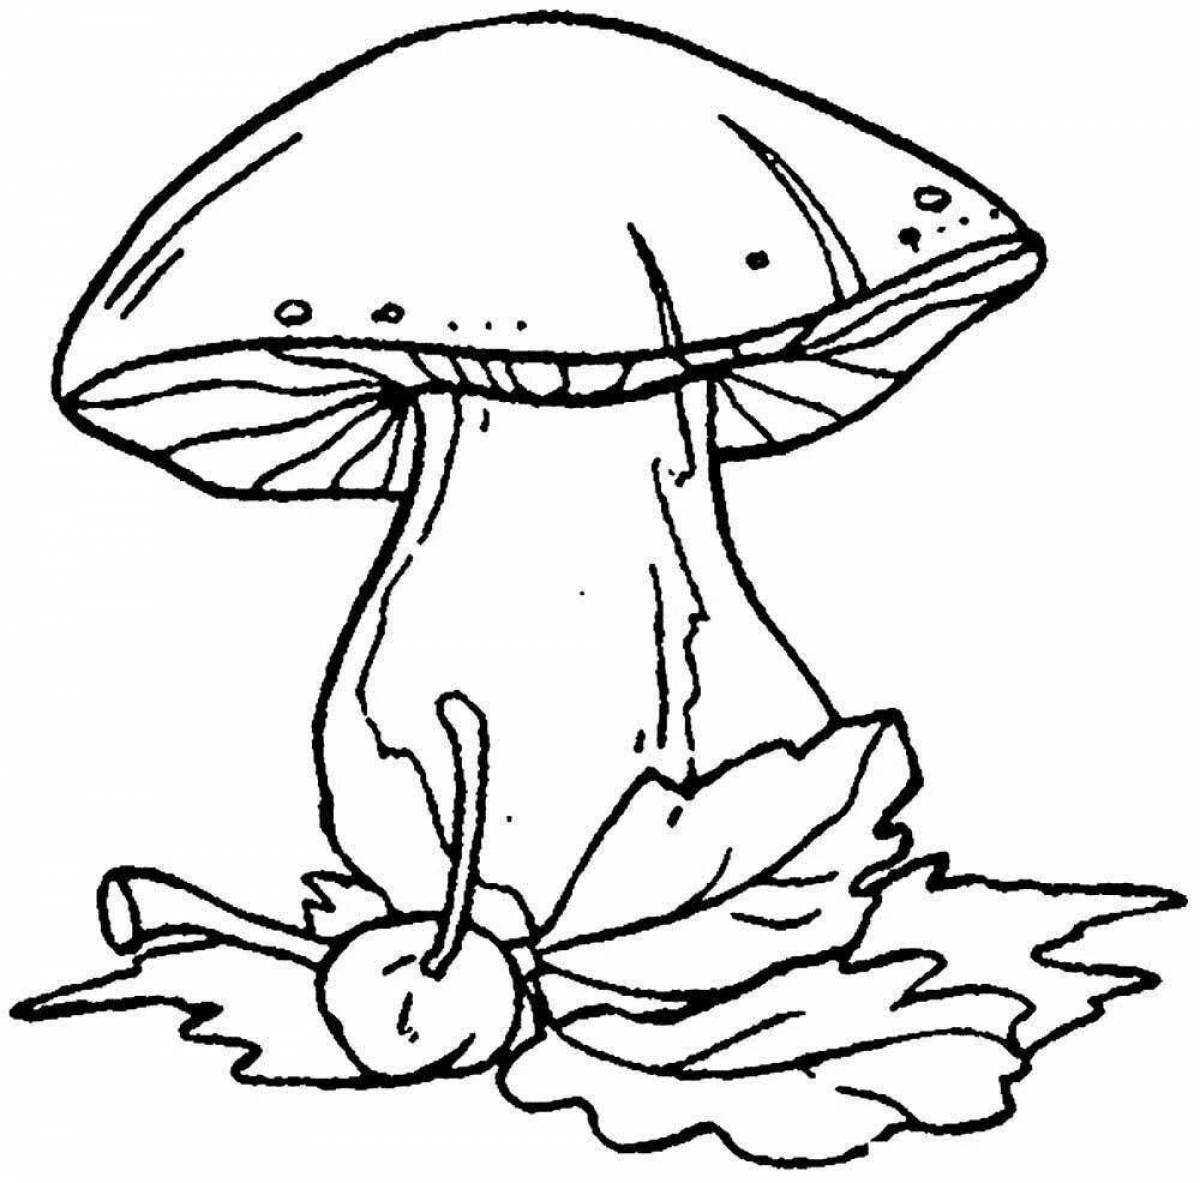 Magic mushroom coloring pages for kids